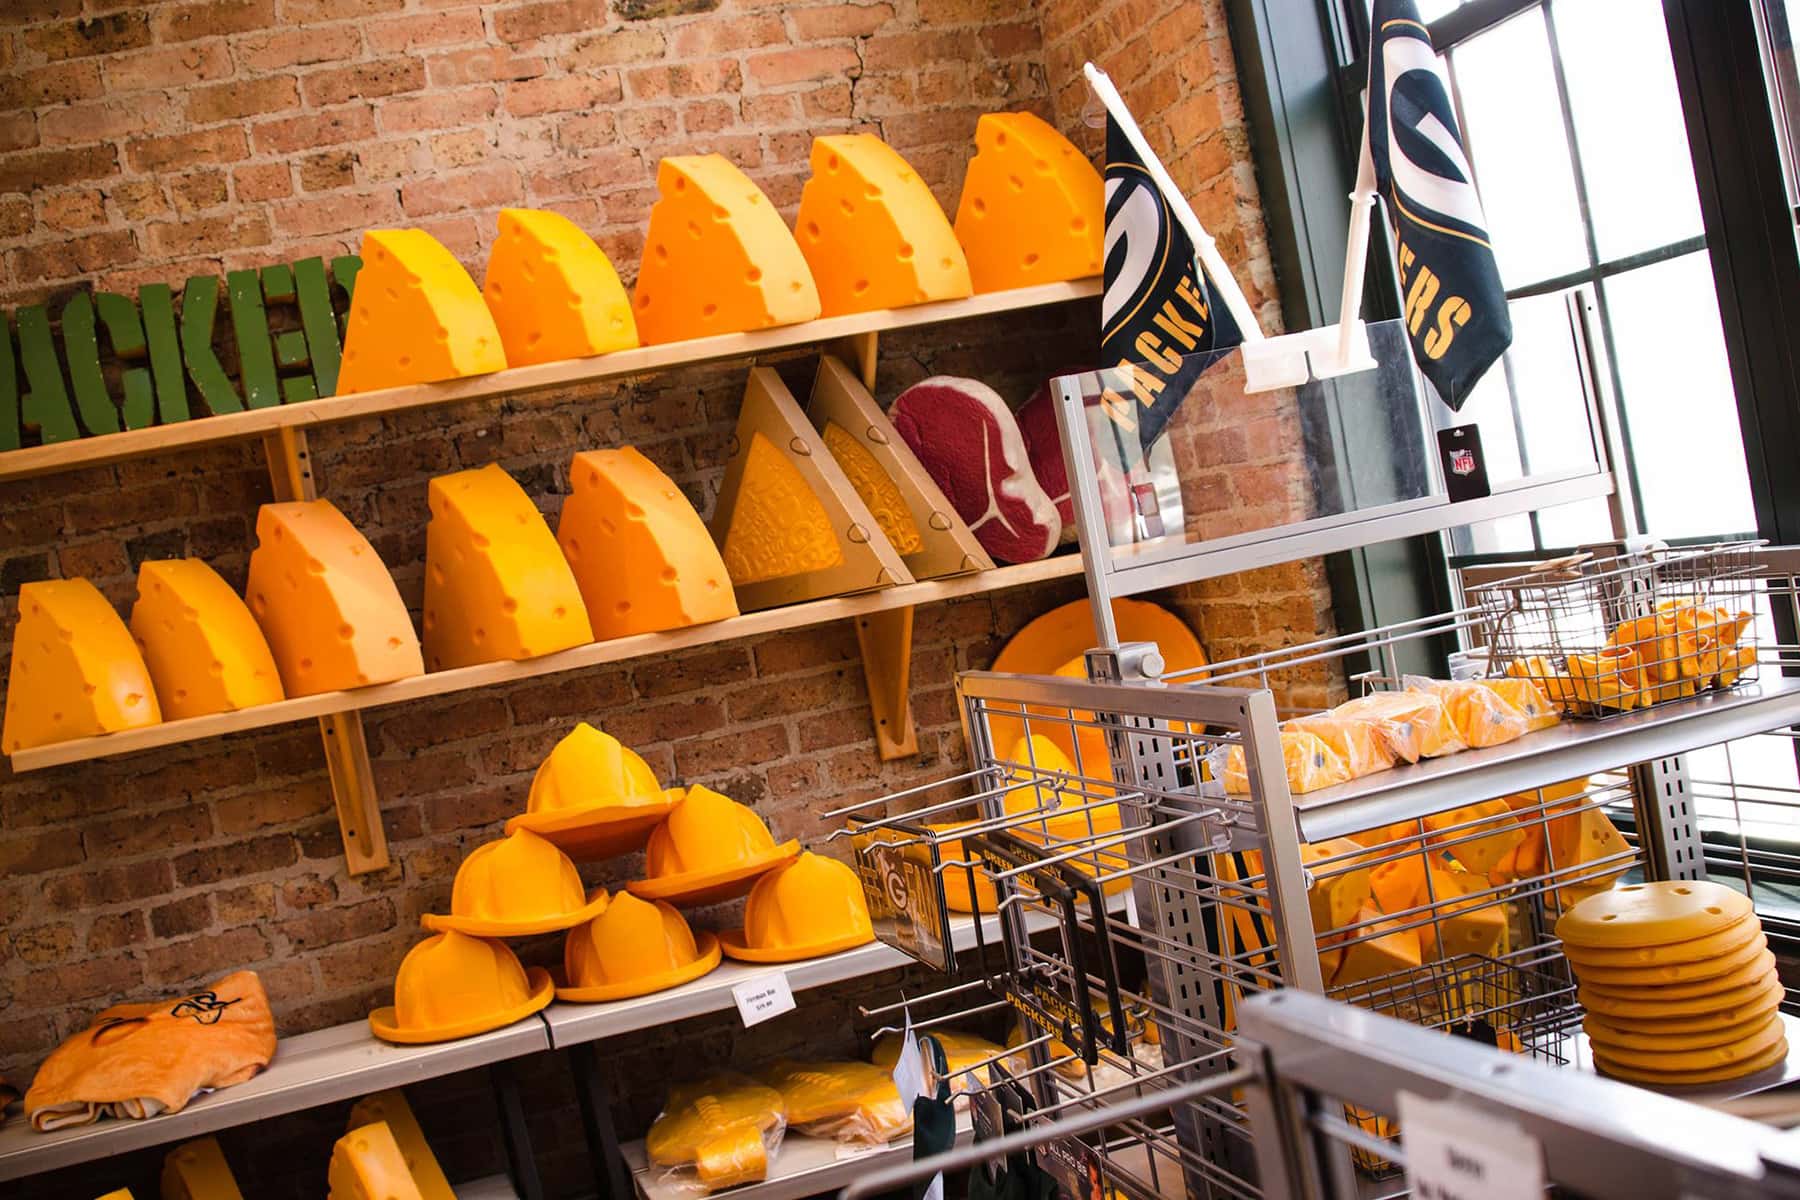 How Wisconsin's Cheesehead hat turned an insult into an icon - CNET